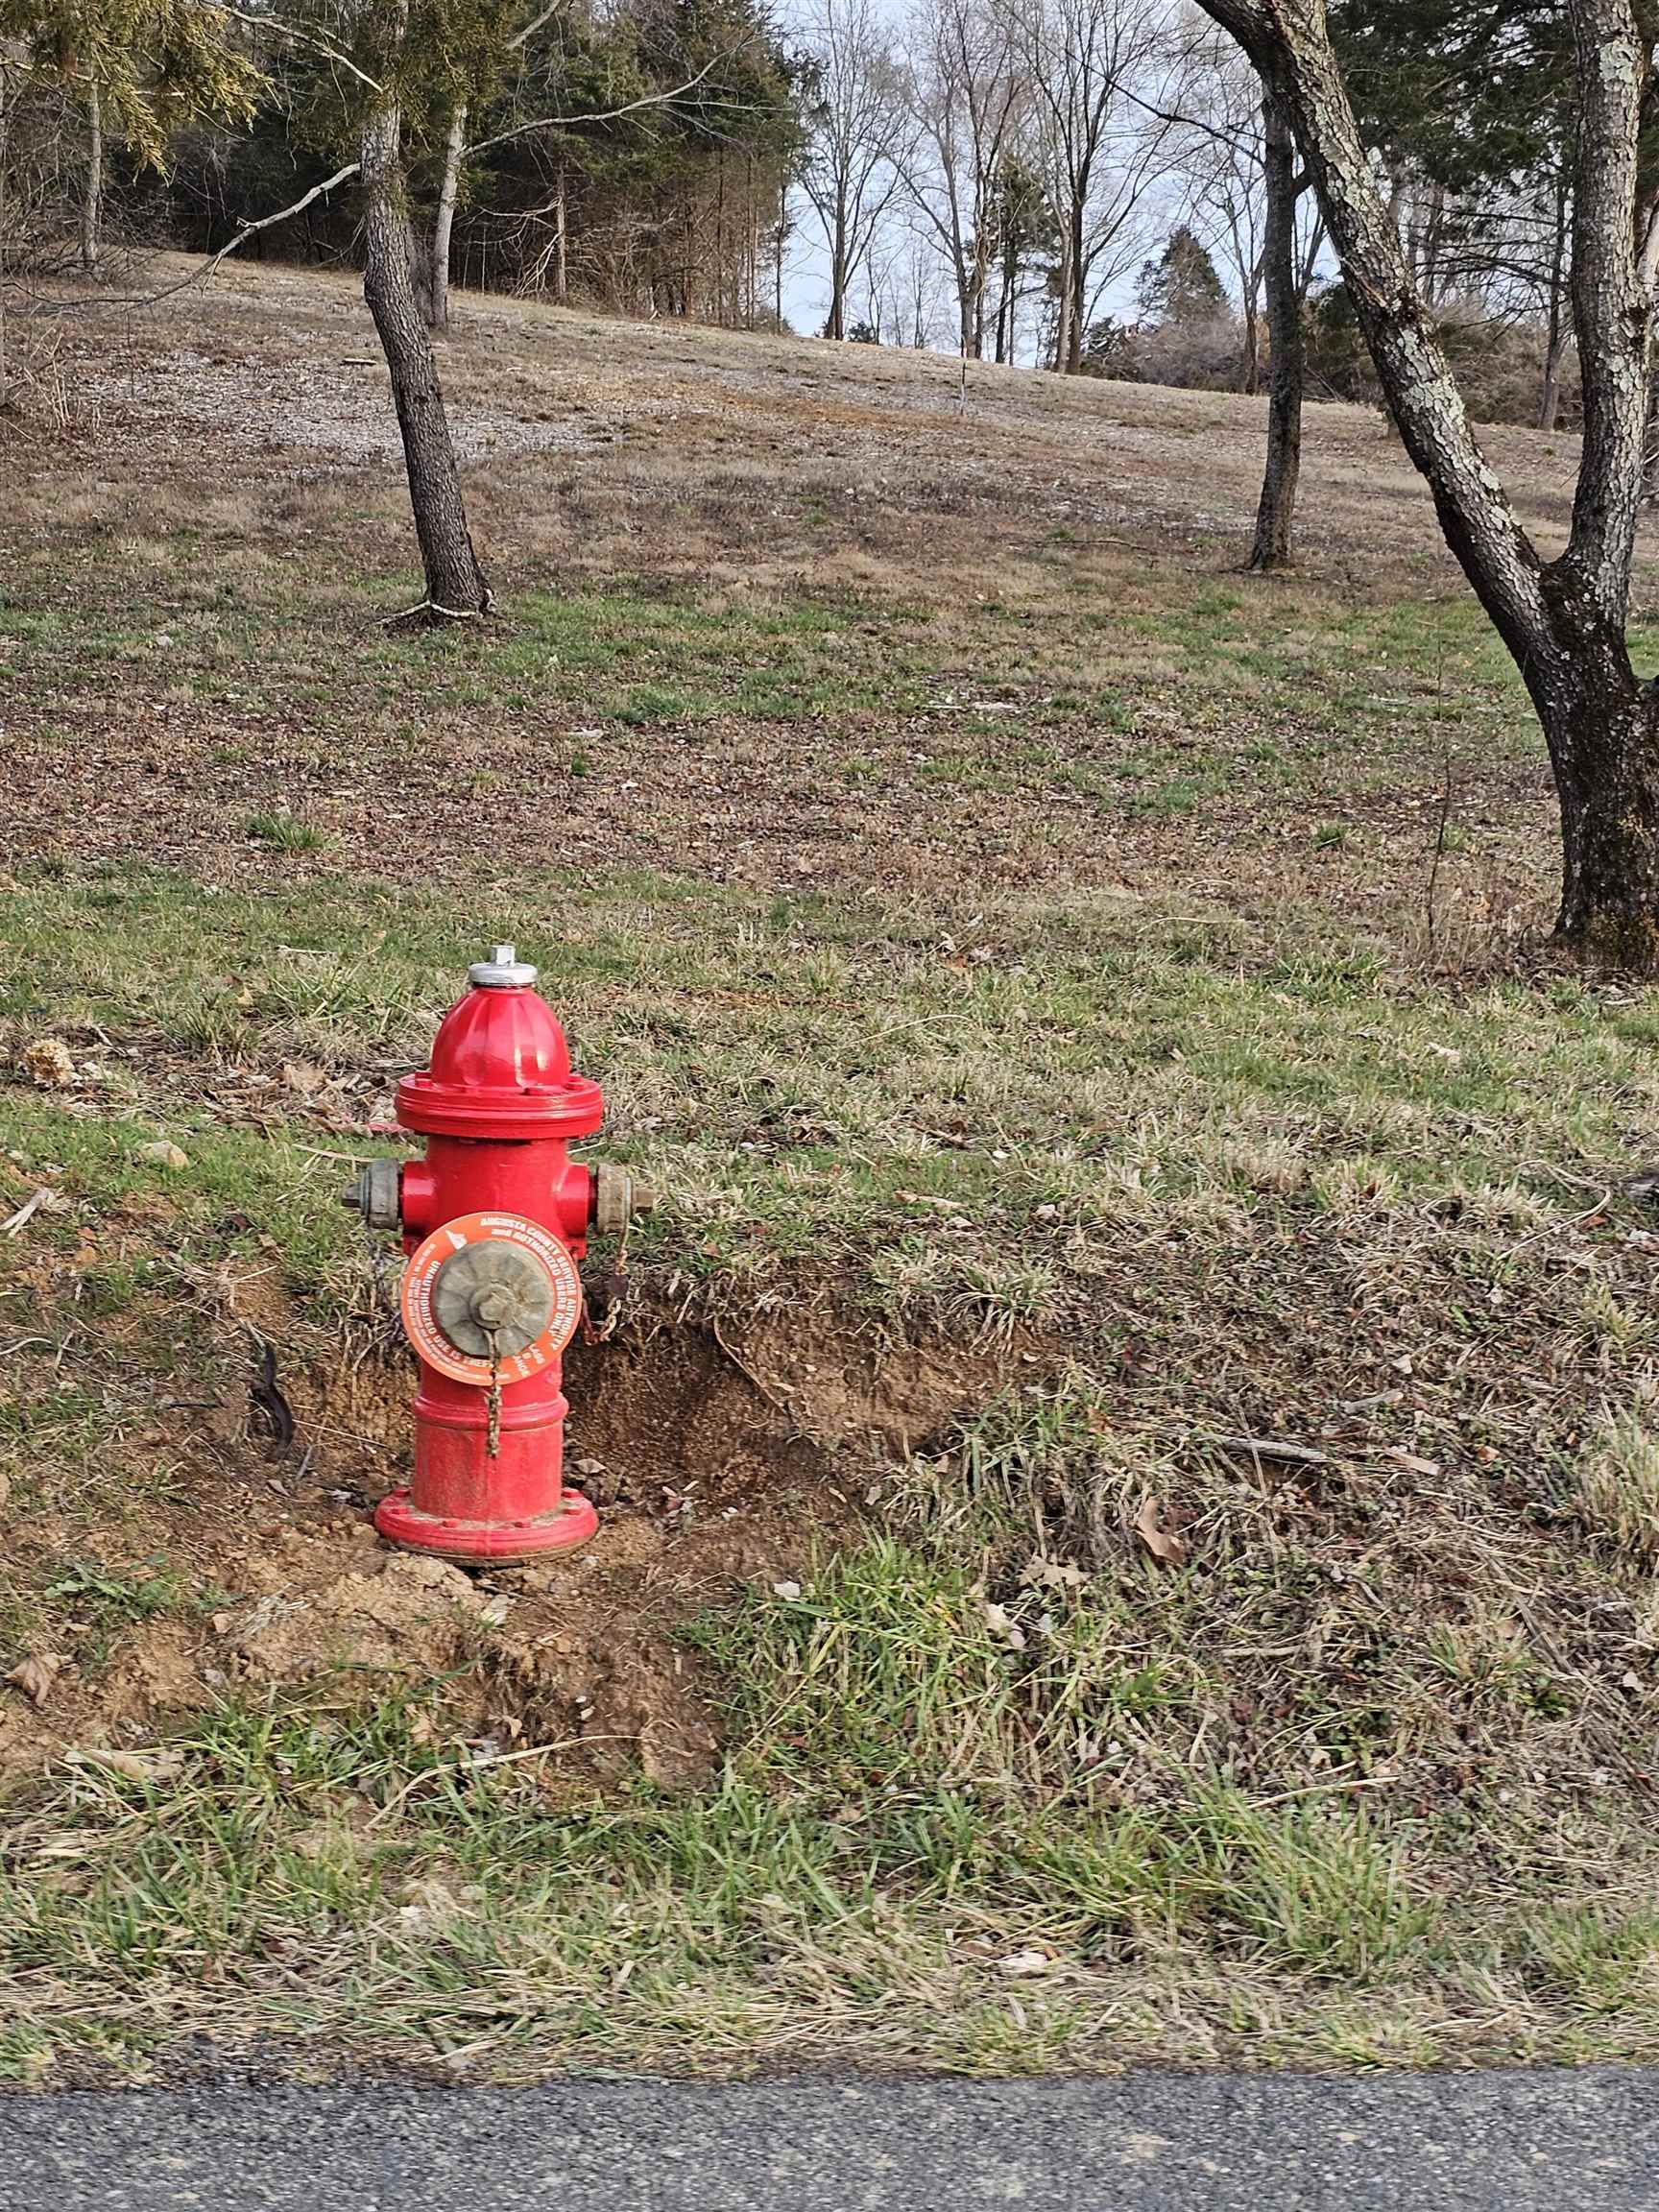 Fire protection and an Augusta County public water line runs through the front of this lot. The purchaser is responsible for the connection fee, which is $3,000. Purchaser to confirm the fee.